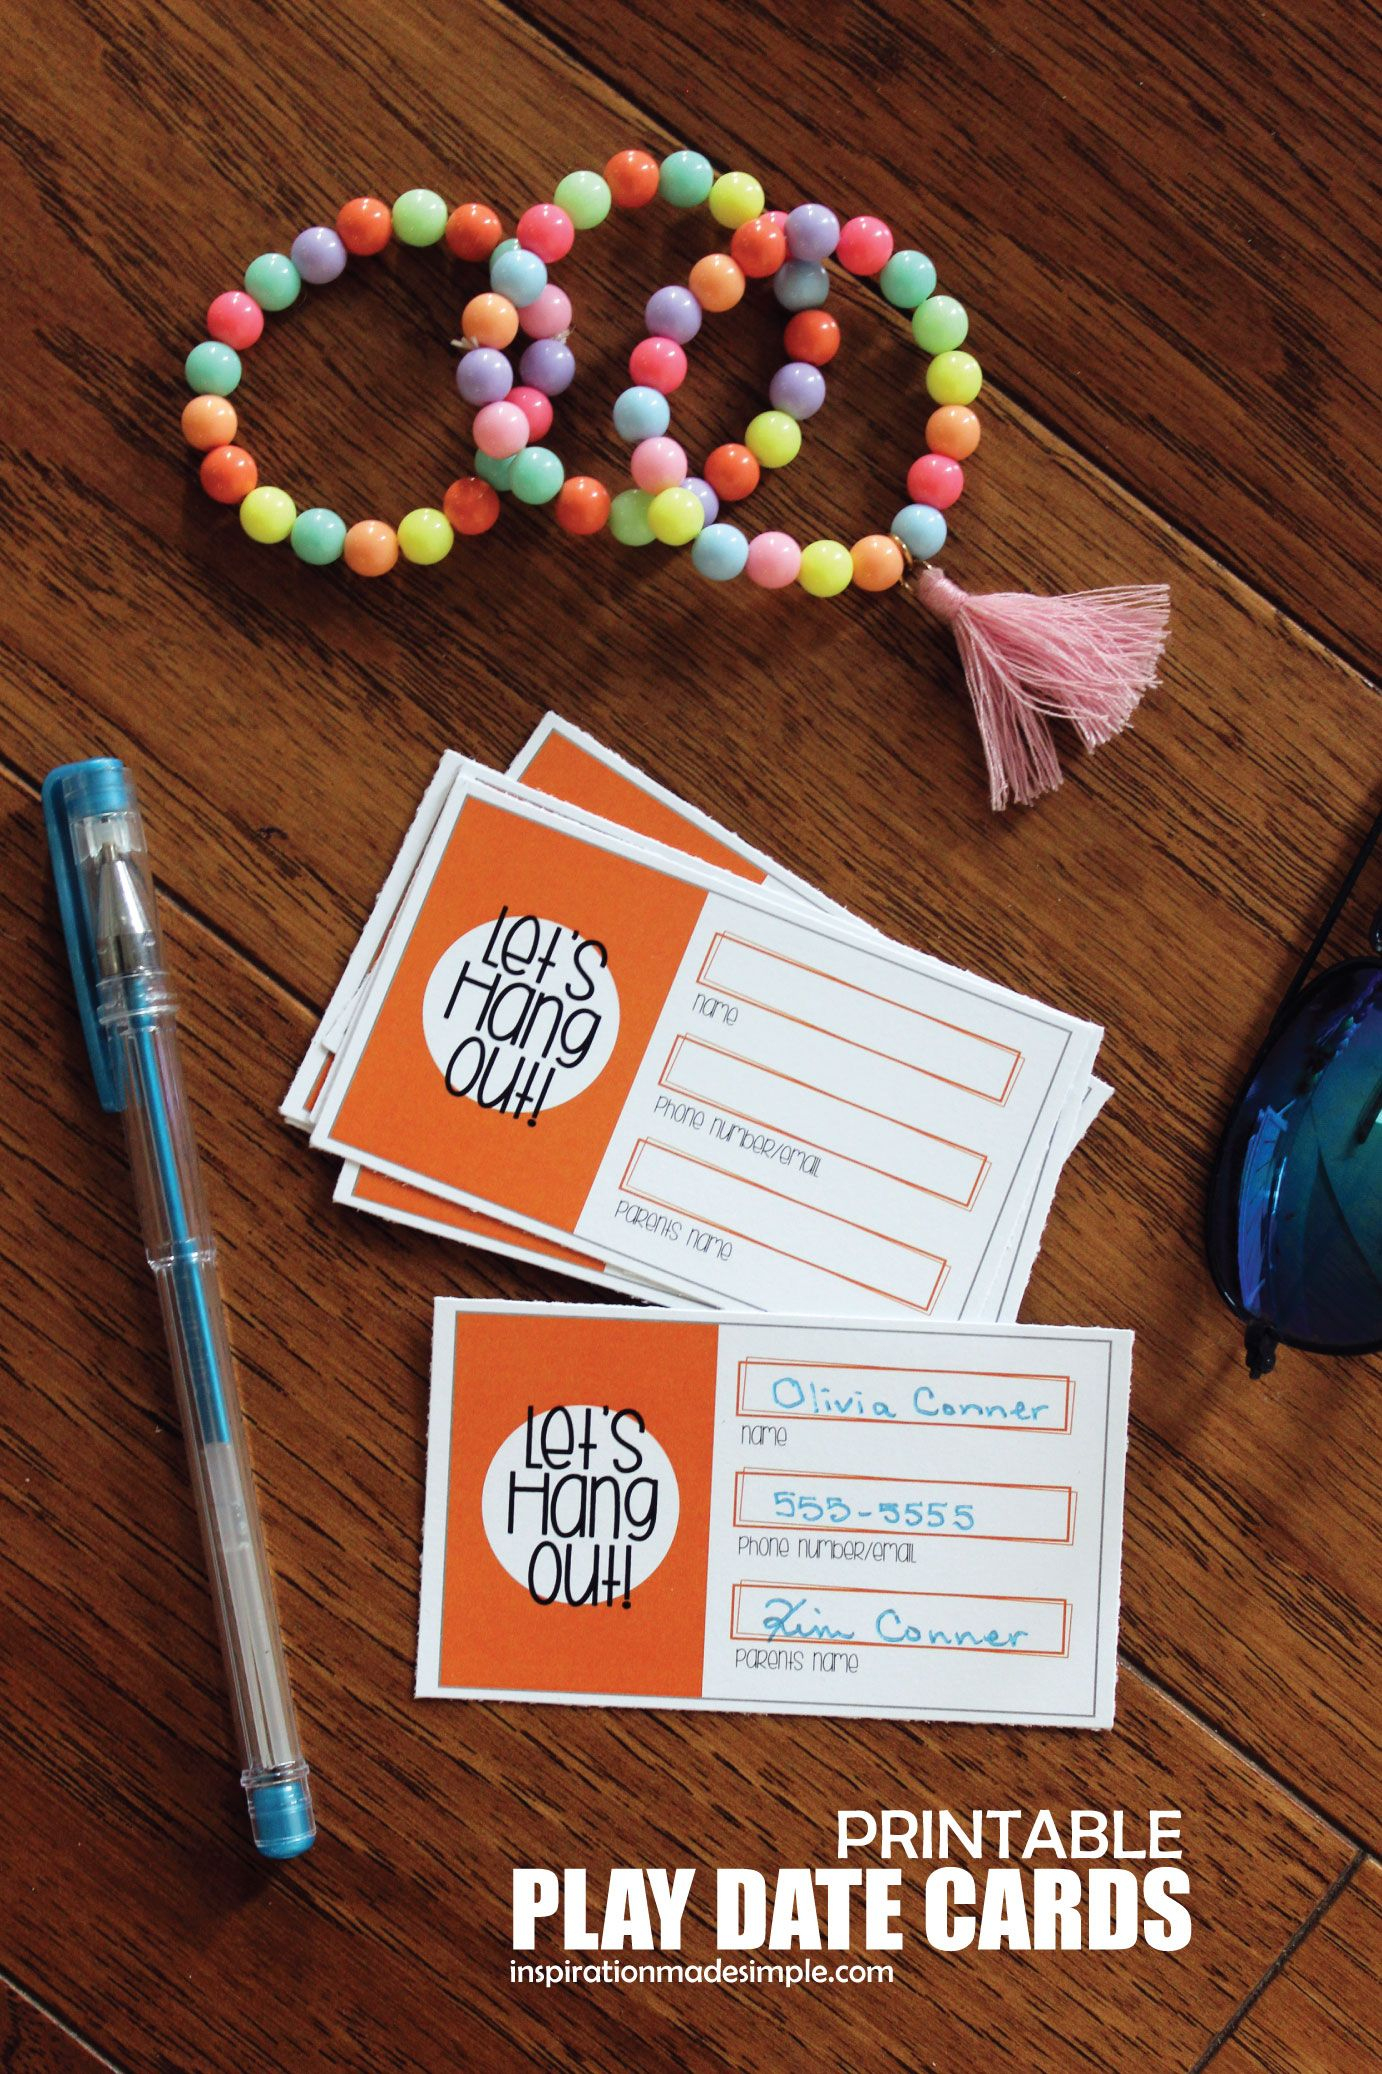 Printable Play Date Cards For Kids | Pinterest - Free Printable Play Date Cards